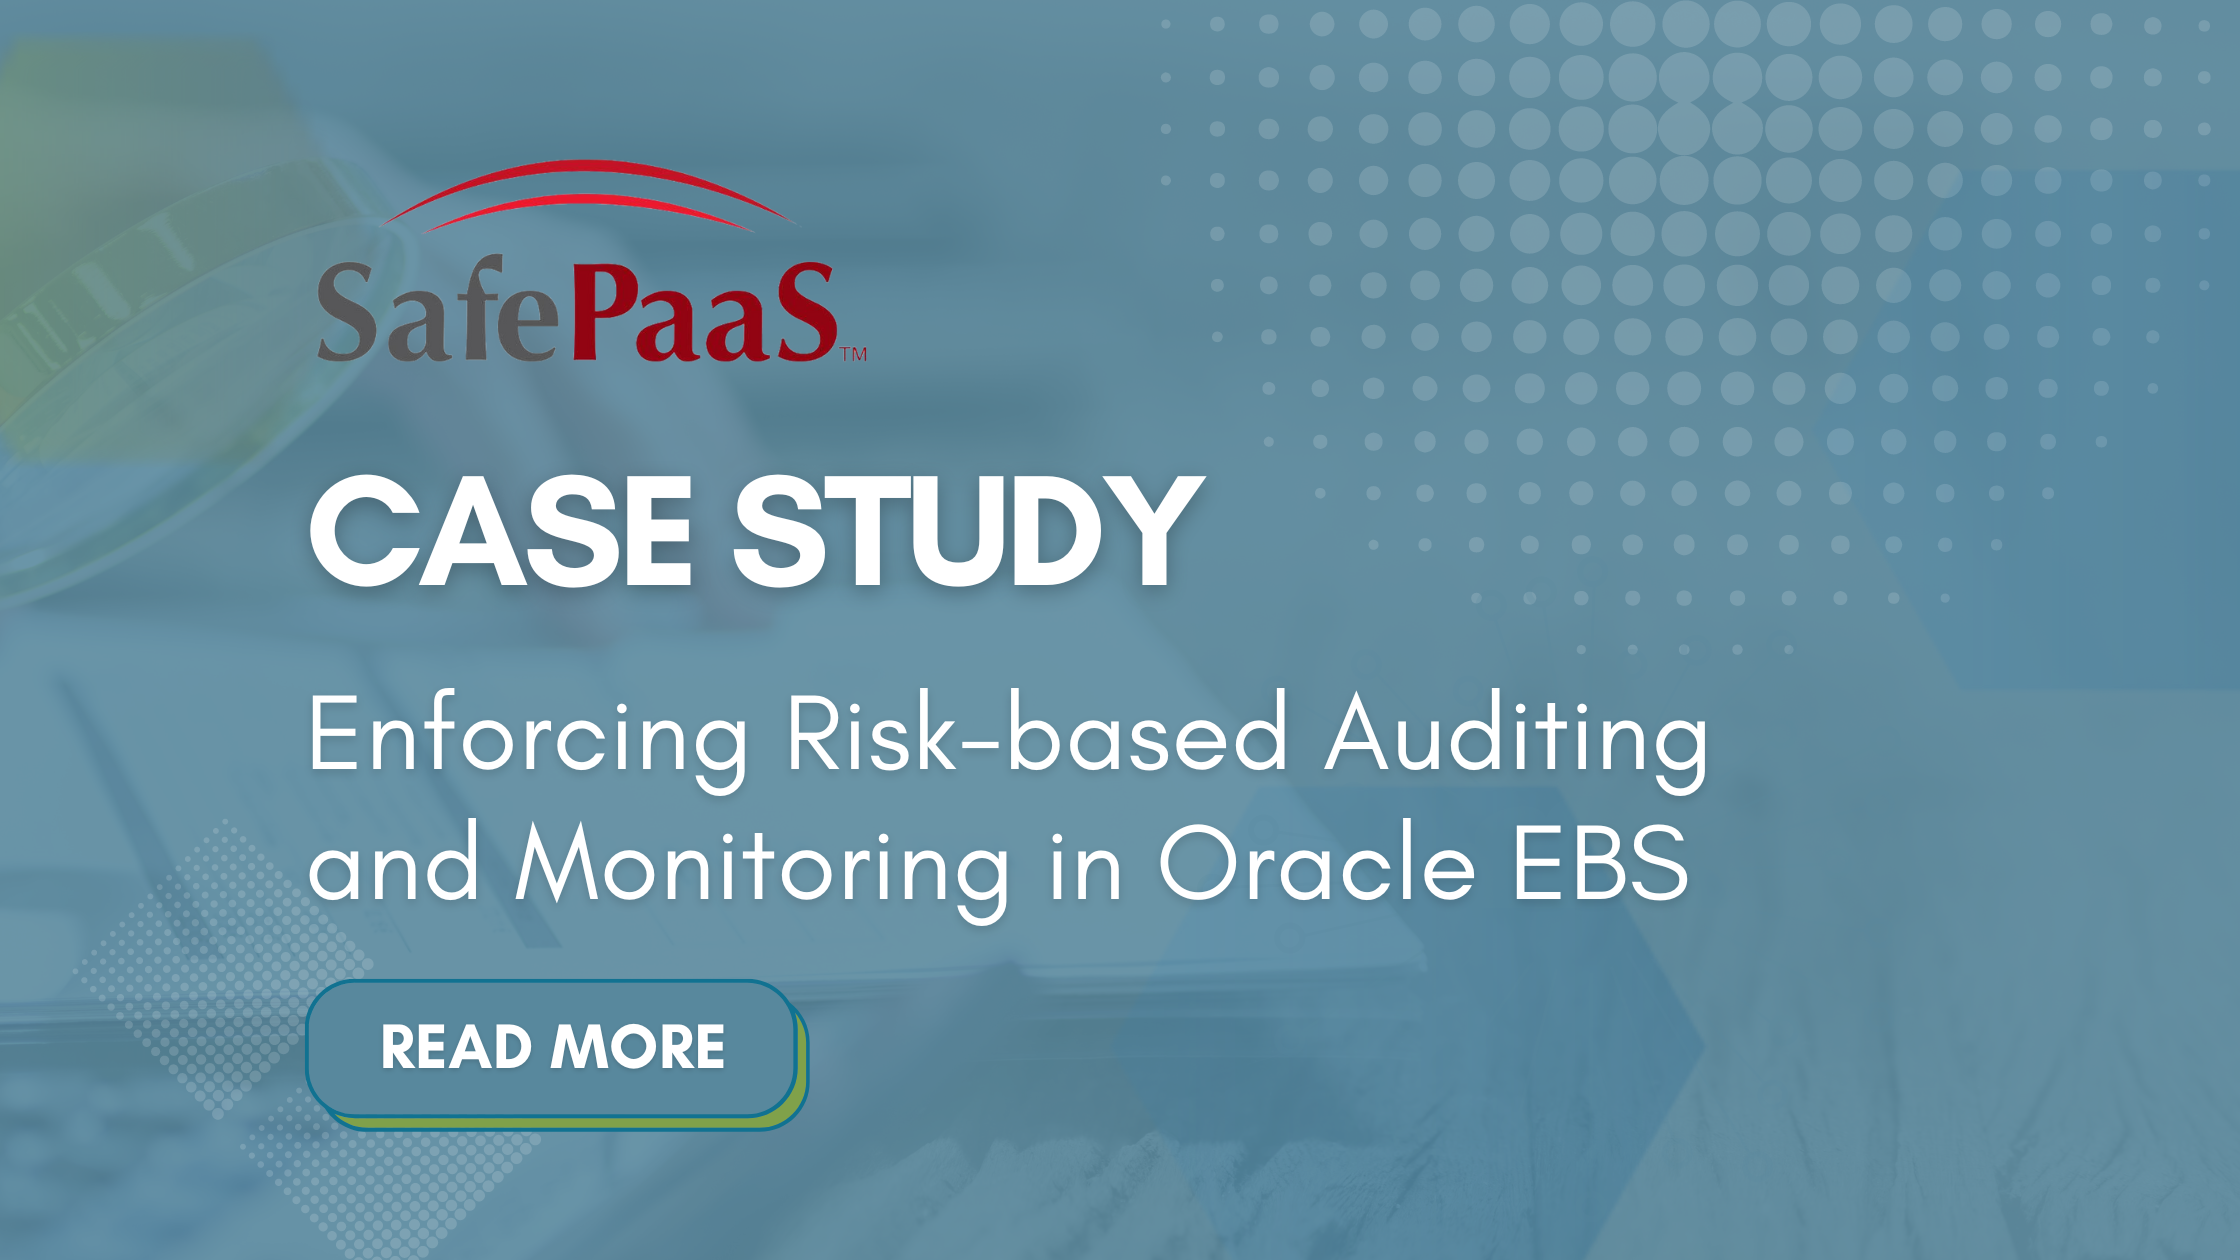 Enforcing Risk-based Auditing and Monitoring in Oracle EBS